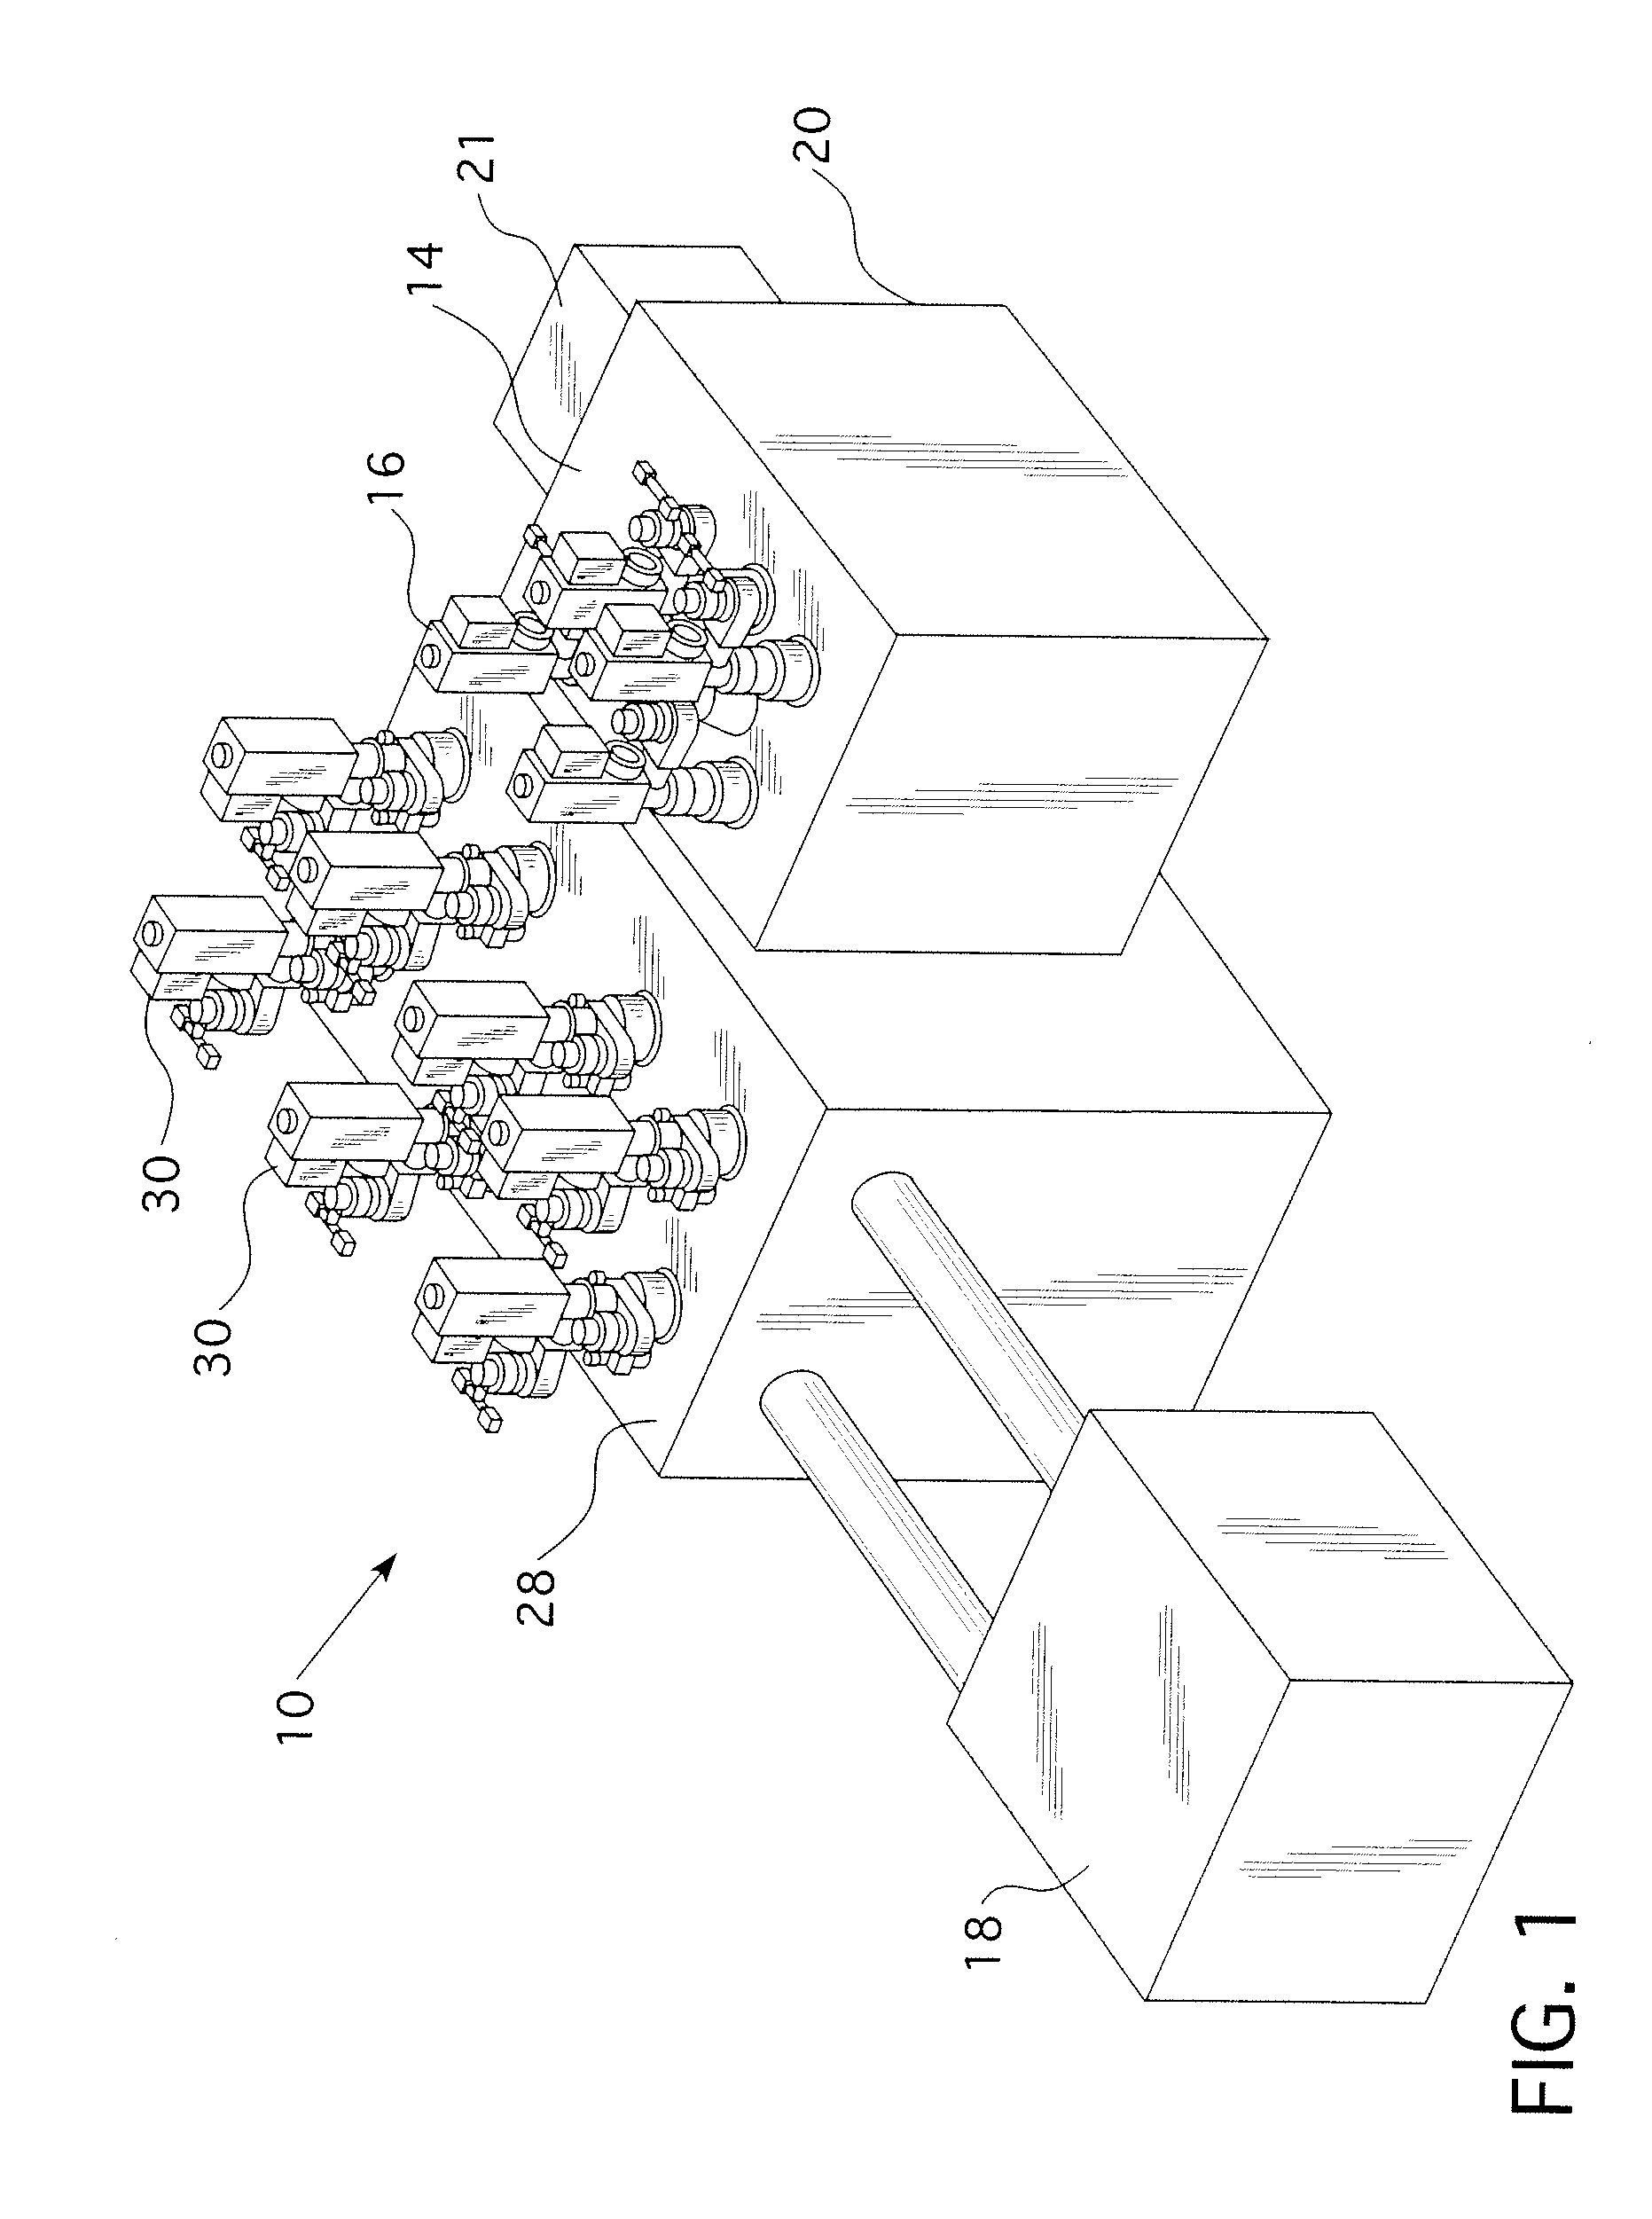 Systems and methods for casting metallic materials